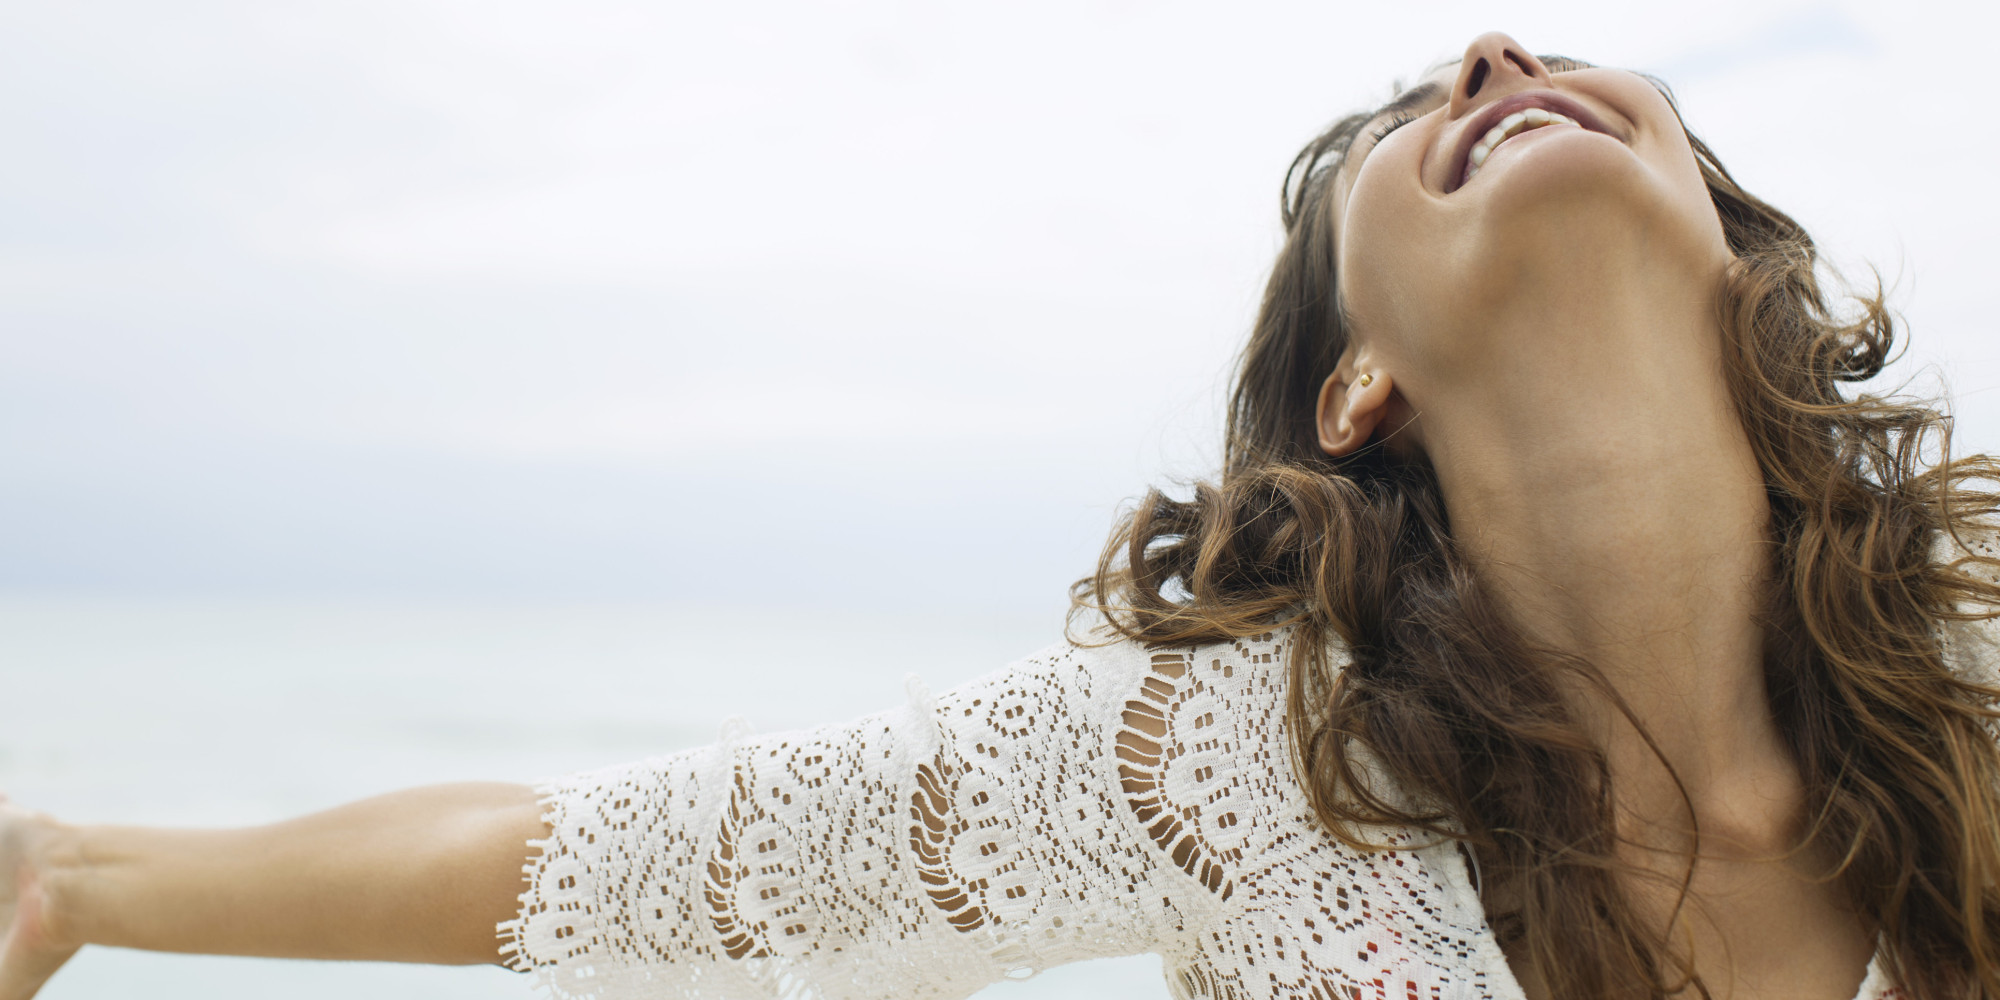 11 Secrets To All-Day Energy | HuffPost